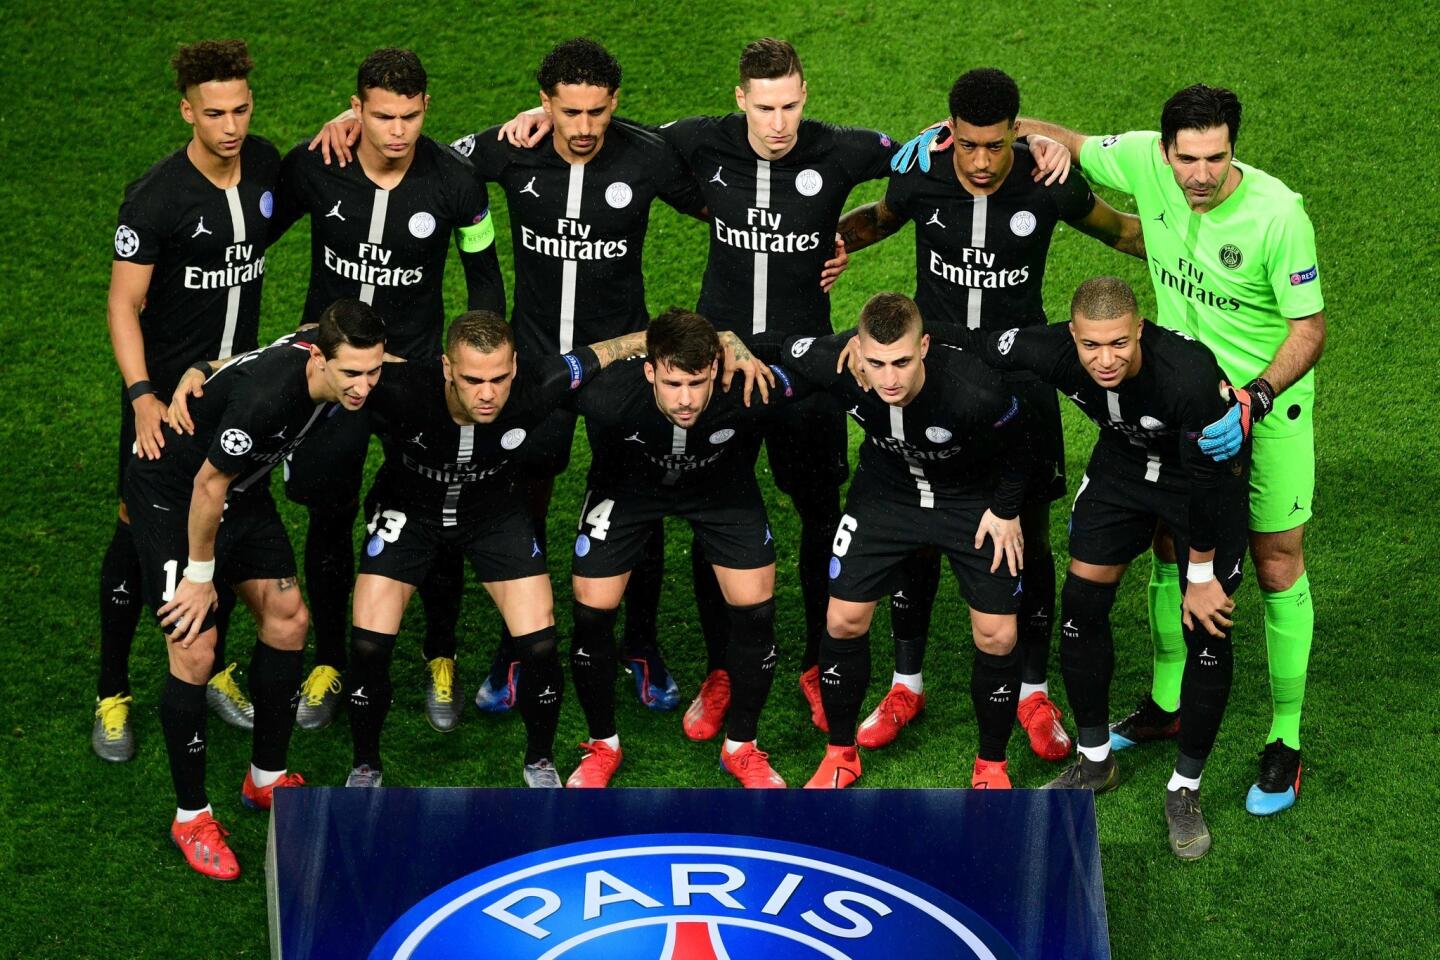 Paris Saint-Germain's players pose for a team picture prior to the UEFA Champions League round of 16 second-leg football match between Paris Saint-Germain (PSG) and Manchester United at the Parc des Princes stadium in Paris on March 6, 2019: (Front row from L to R) Paris Saint-Germain's Argentine midfielder Angel Di Maria, Paris Saint-Germain's Brazilian defender Dani Alves, Paris Saint-Germain's Spanish defender Juan Bernat, Paris Saint-Germain's Italian midfielder Marco Verratti, Paris Saint-Germain's French forward Kylian Mbappe (back row from L to R) Paris Saint-Germain's German defender Thilo Kehrer, Paris Saint-Germain's Brazilian defender Thiago Silva, Paris Saint-Germain's Brazilian defender Marquinhos, Paris Saint-Germain's German midfielder Julian Draxler, Paris Saint-Germain's French defender Presnel Kimpembe and Paris Saint-Germain's Italian goalkeeper Gianluigi Buffon. (Photo by Martin BUREAU / AFP)MARTIN BUREAU/AFP/Getty Images ** OUTS - ELSENT, FPG, CM - OUTS * NM, PH, VA if sourced by CT, LA or MoD **